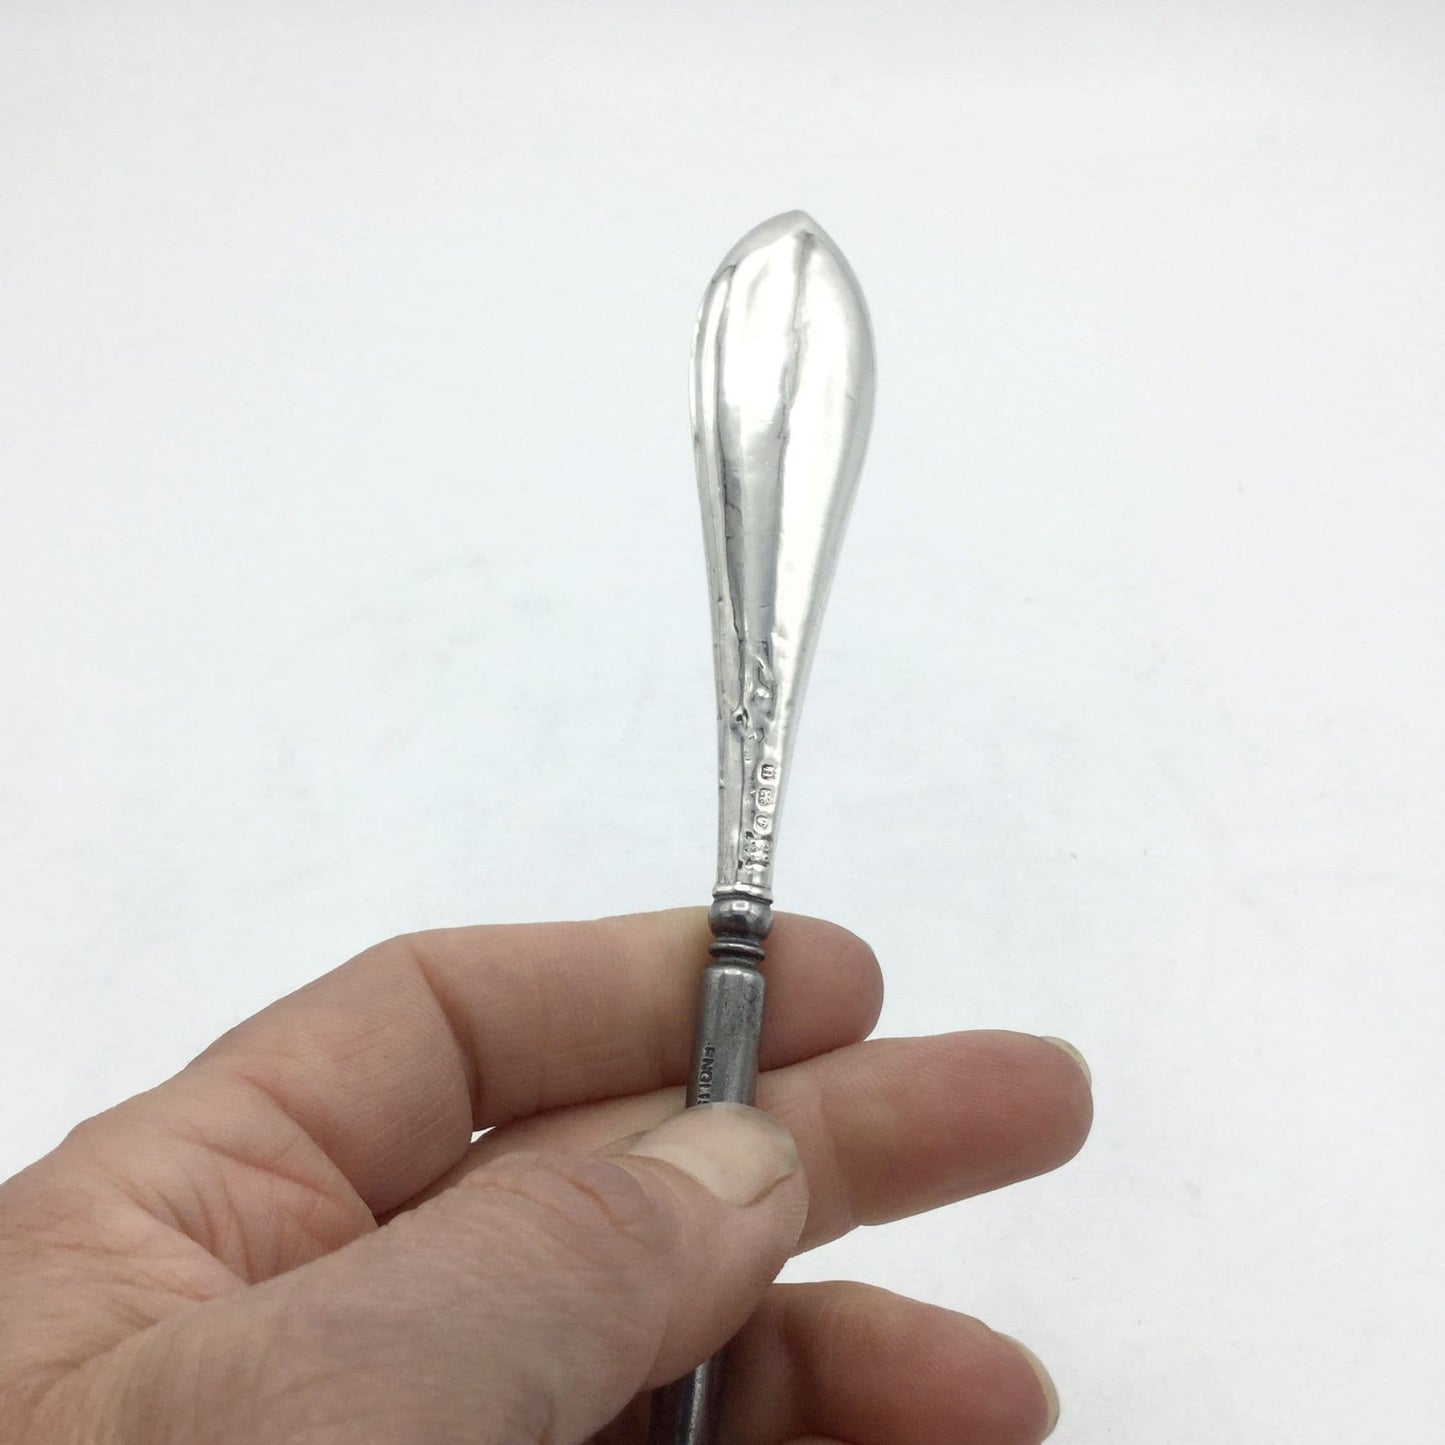 Silver handled antique button hook with a shiny handle held upright